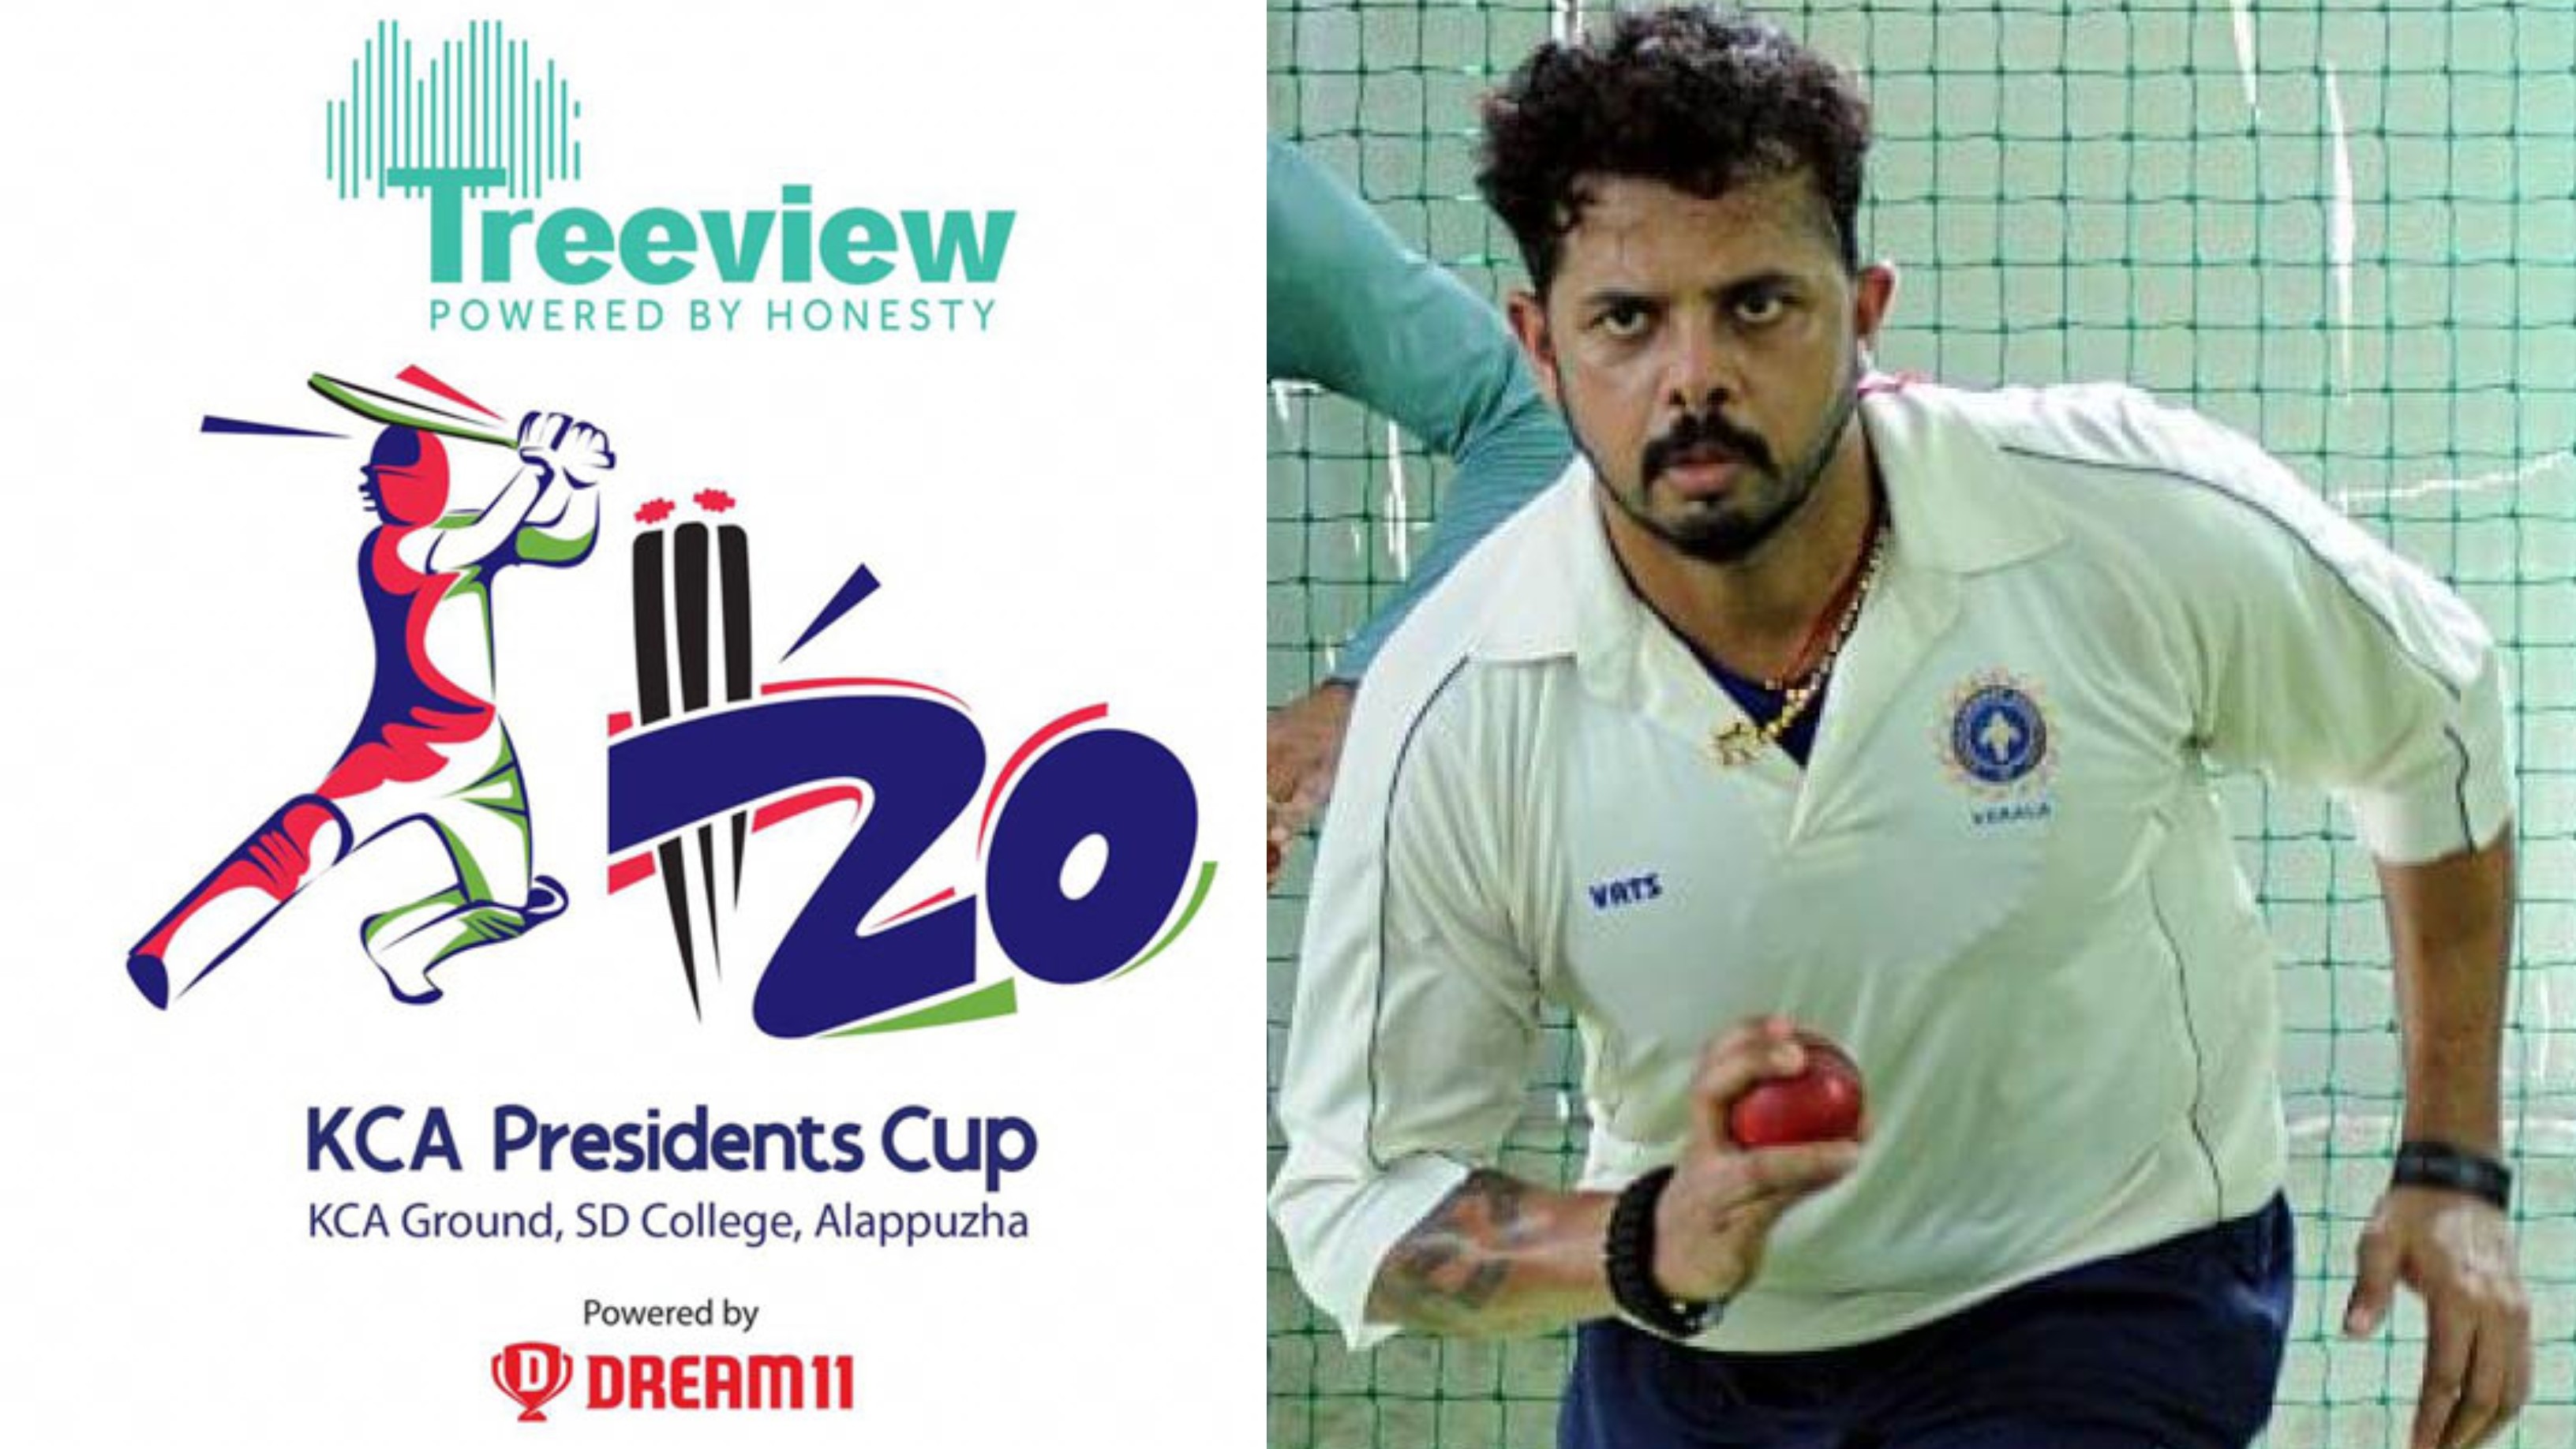 Sreesanth set to return to competitive cricket with KCA President's Cup T20